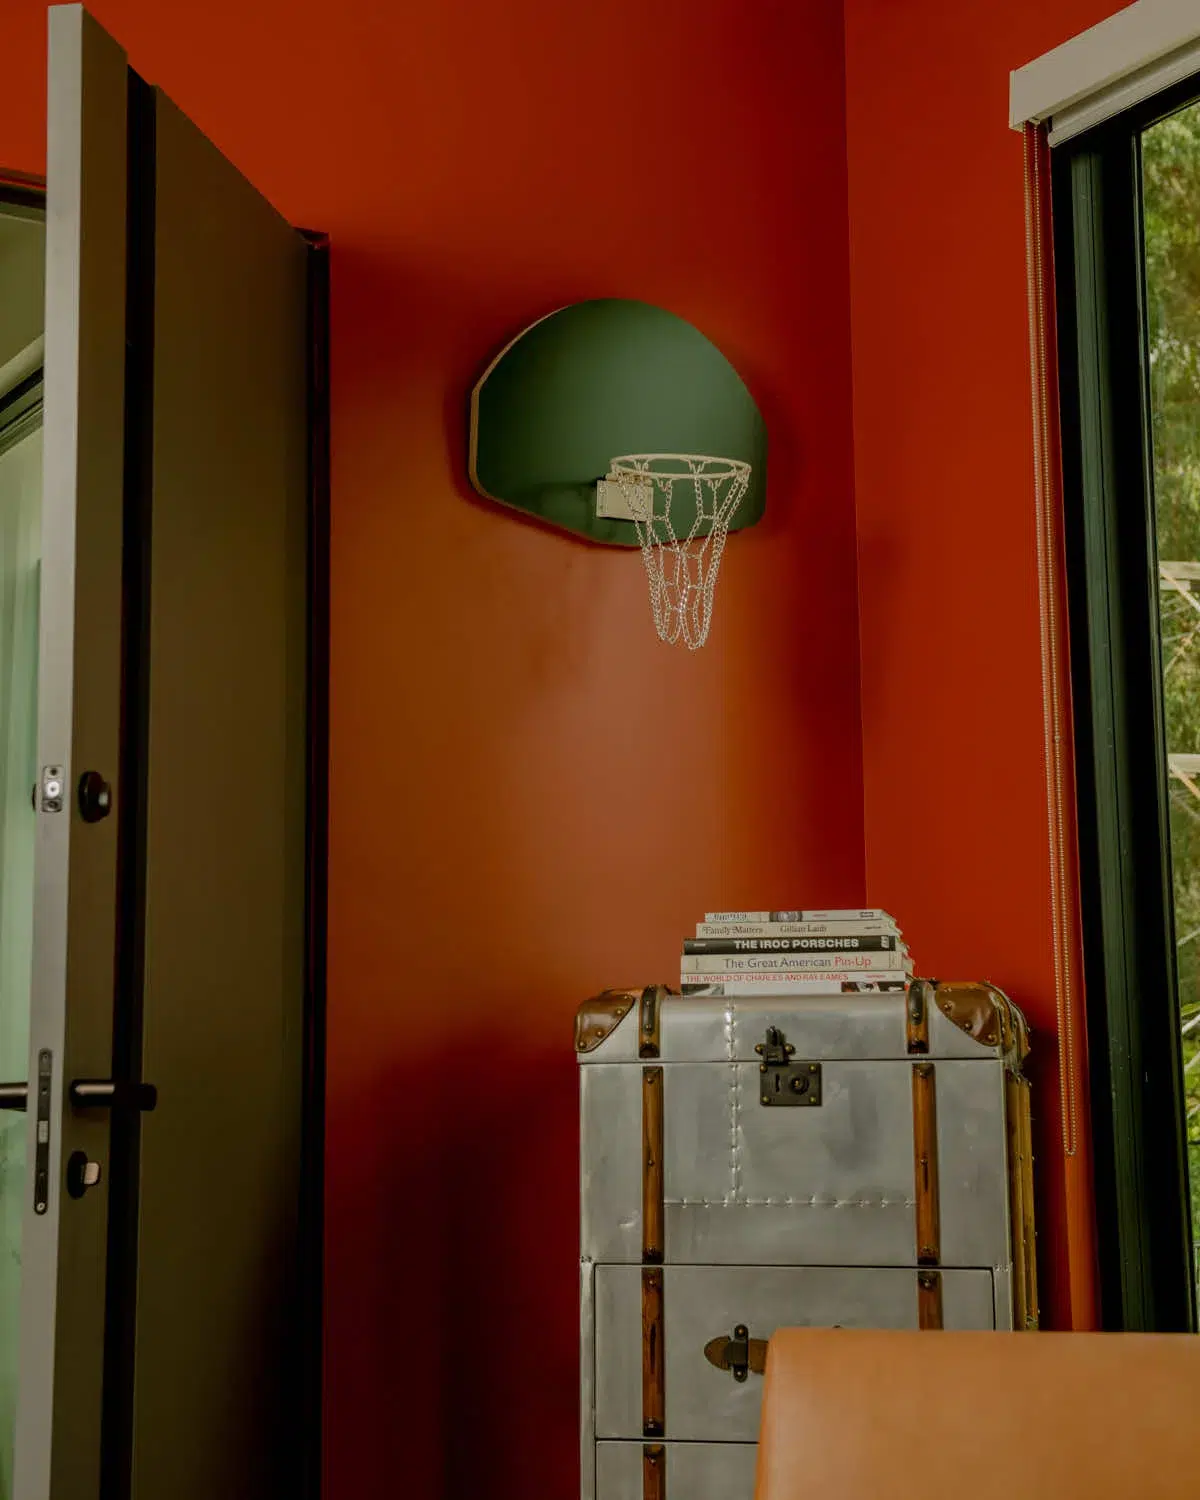 A Green Wooden Hoop in a room with red walls.